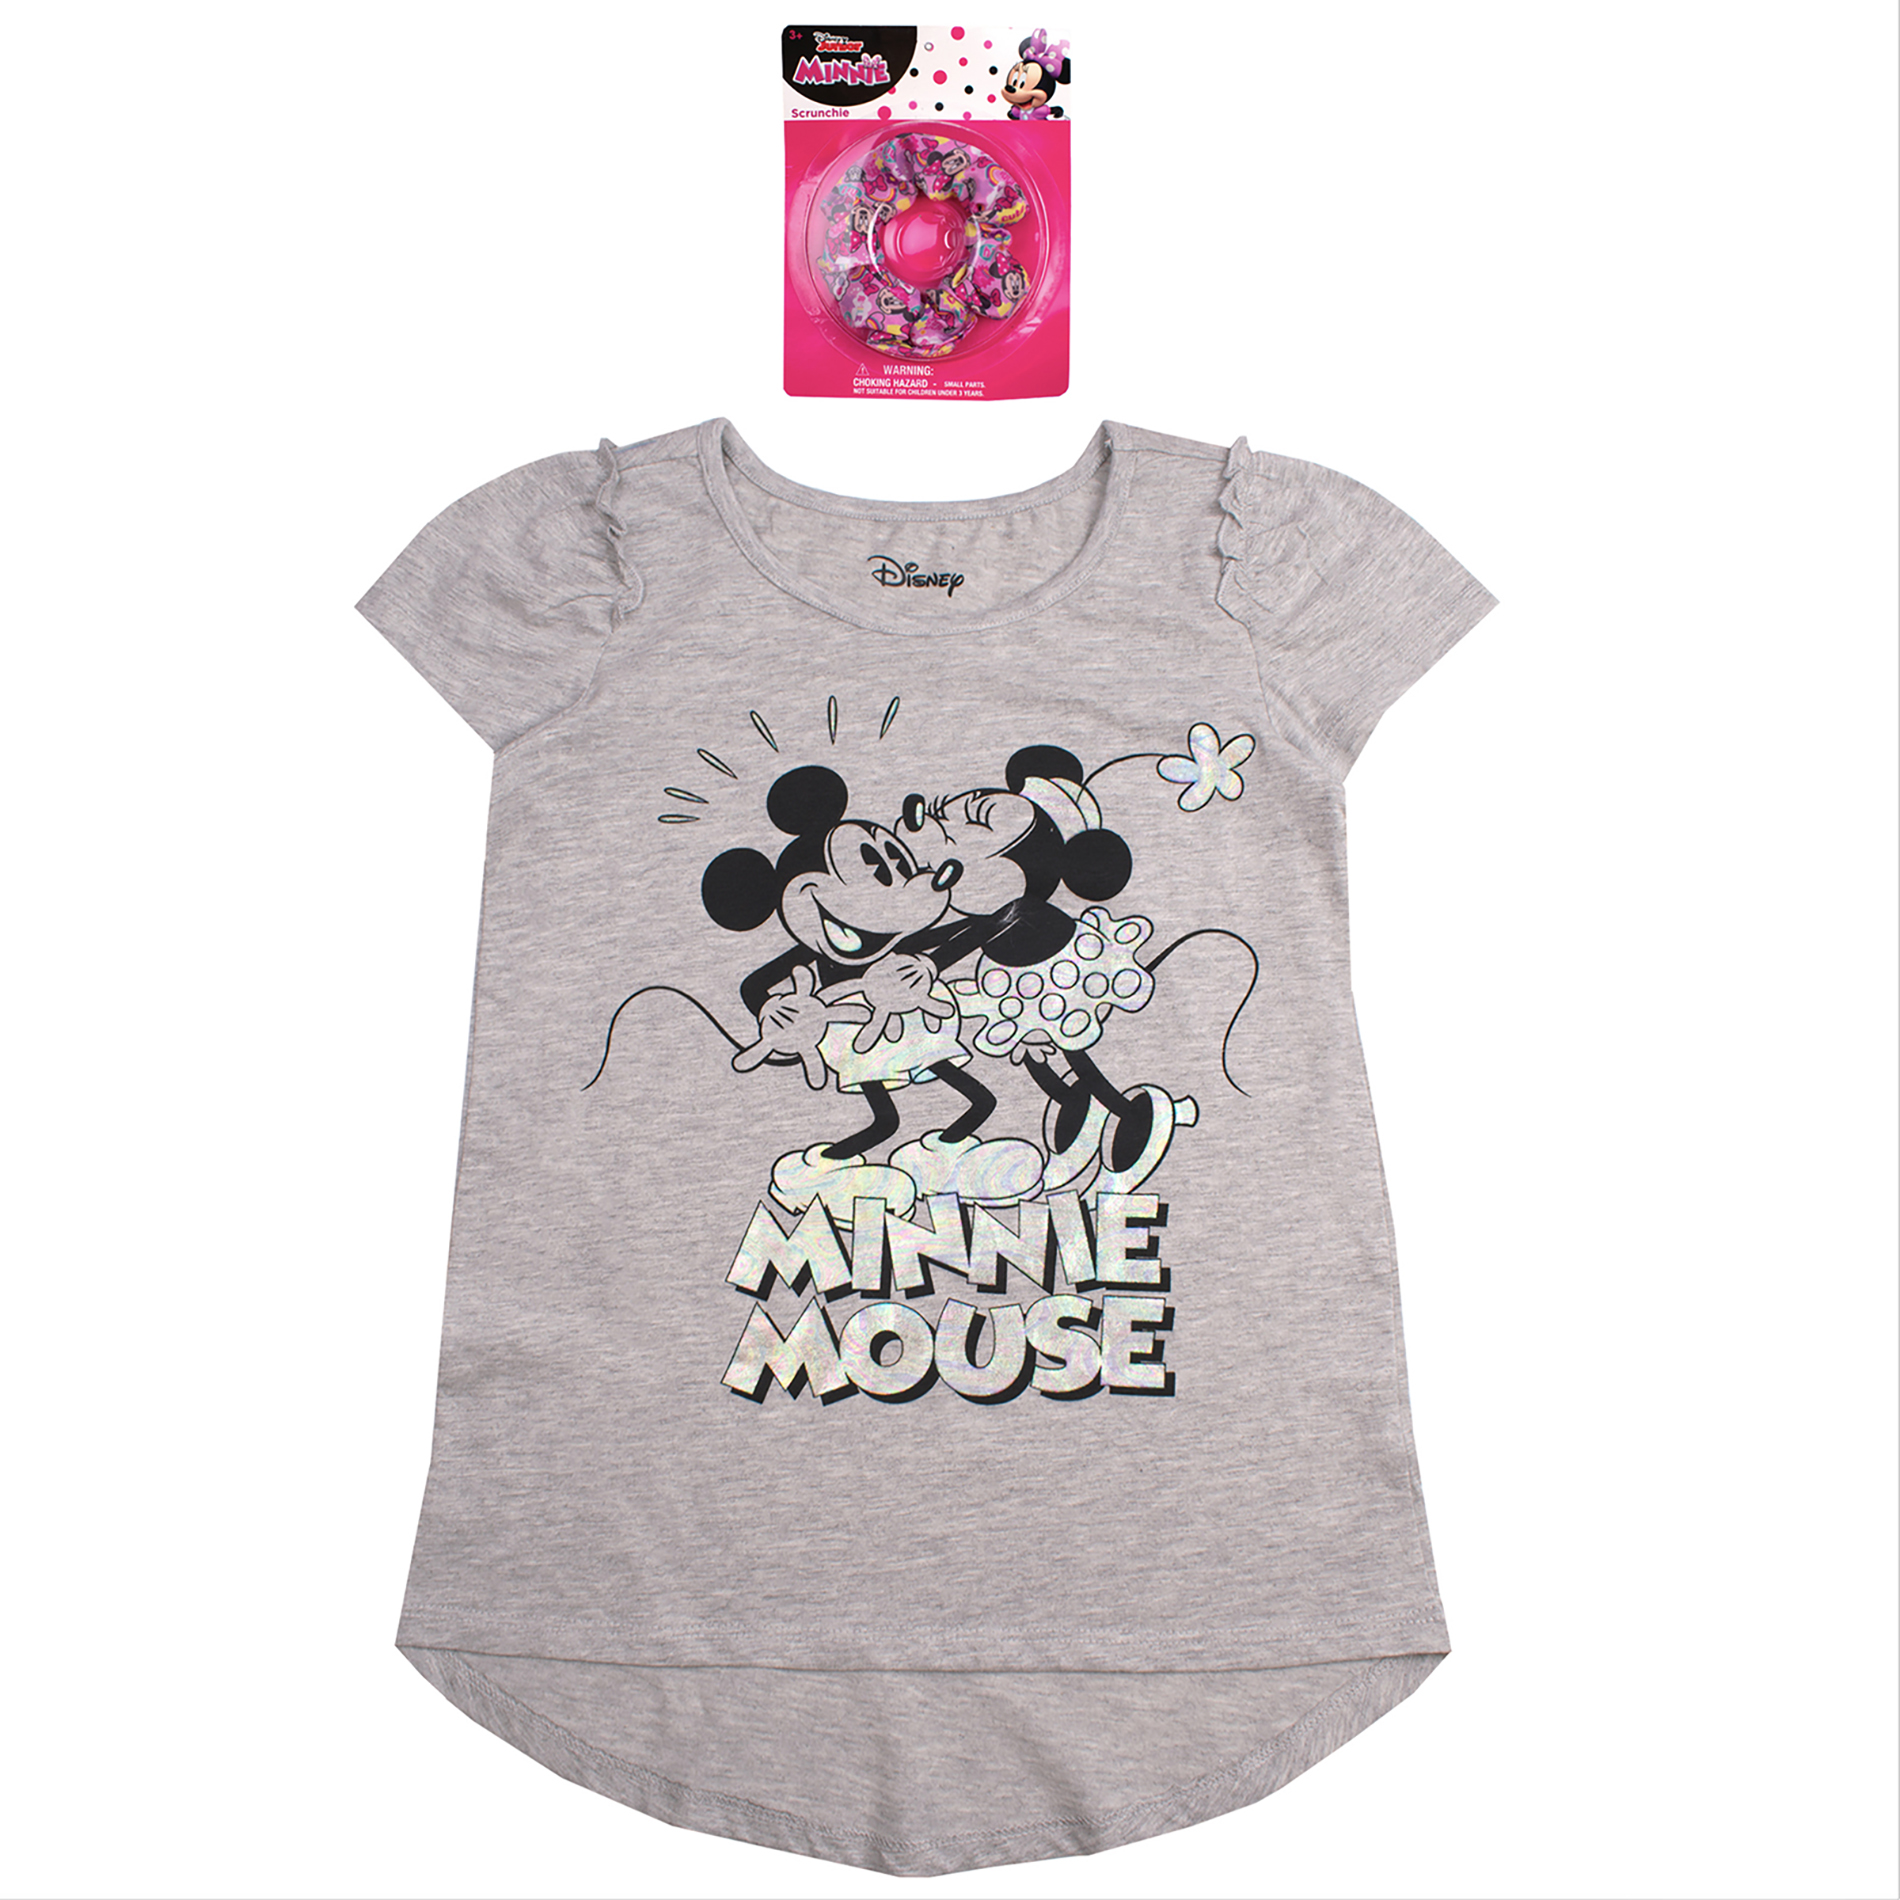 Generic (Unbranded) Girls&#8217; Mini Mouse Knit Top and Scrunchie Set